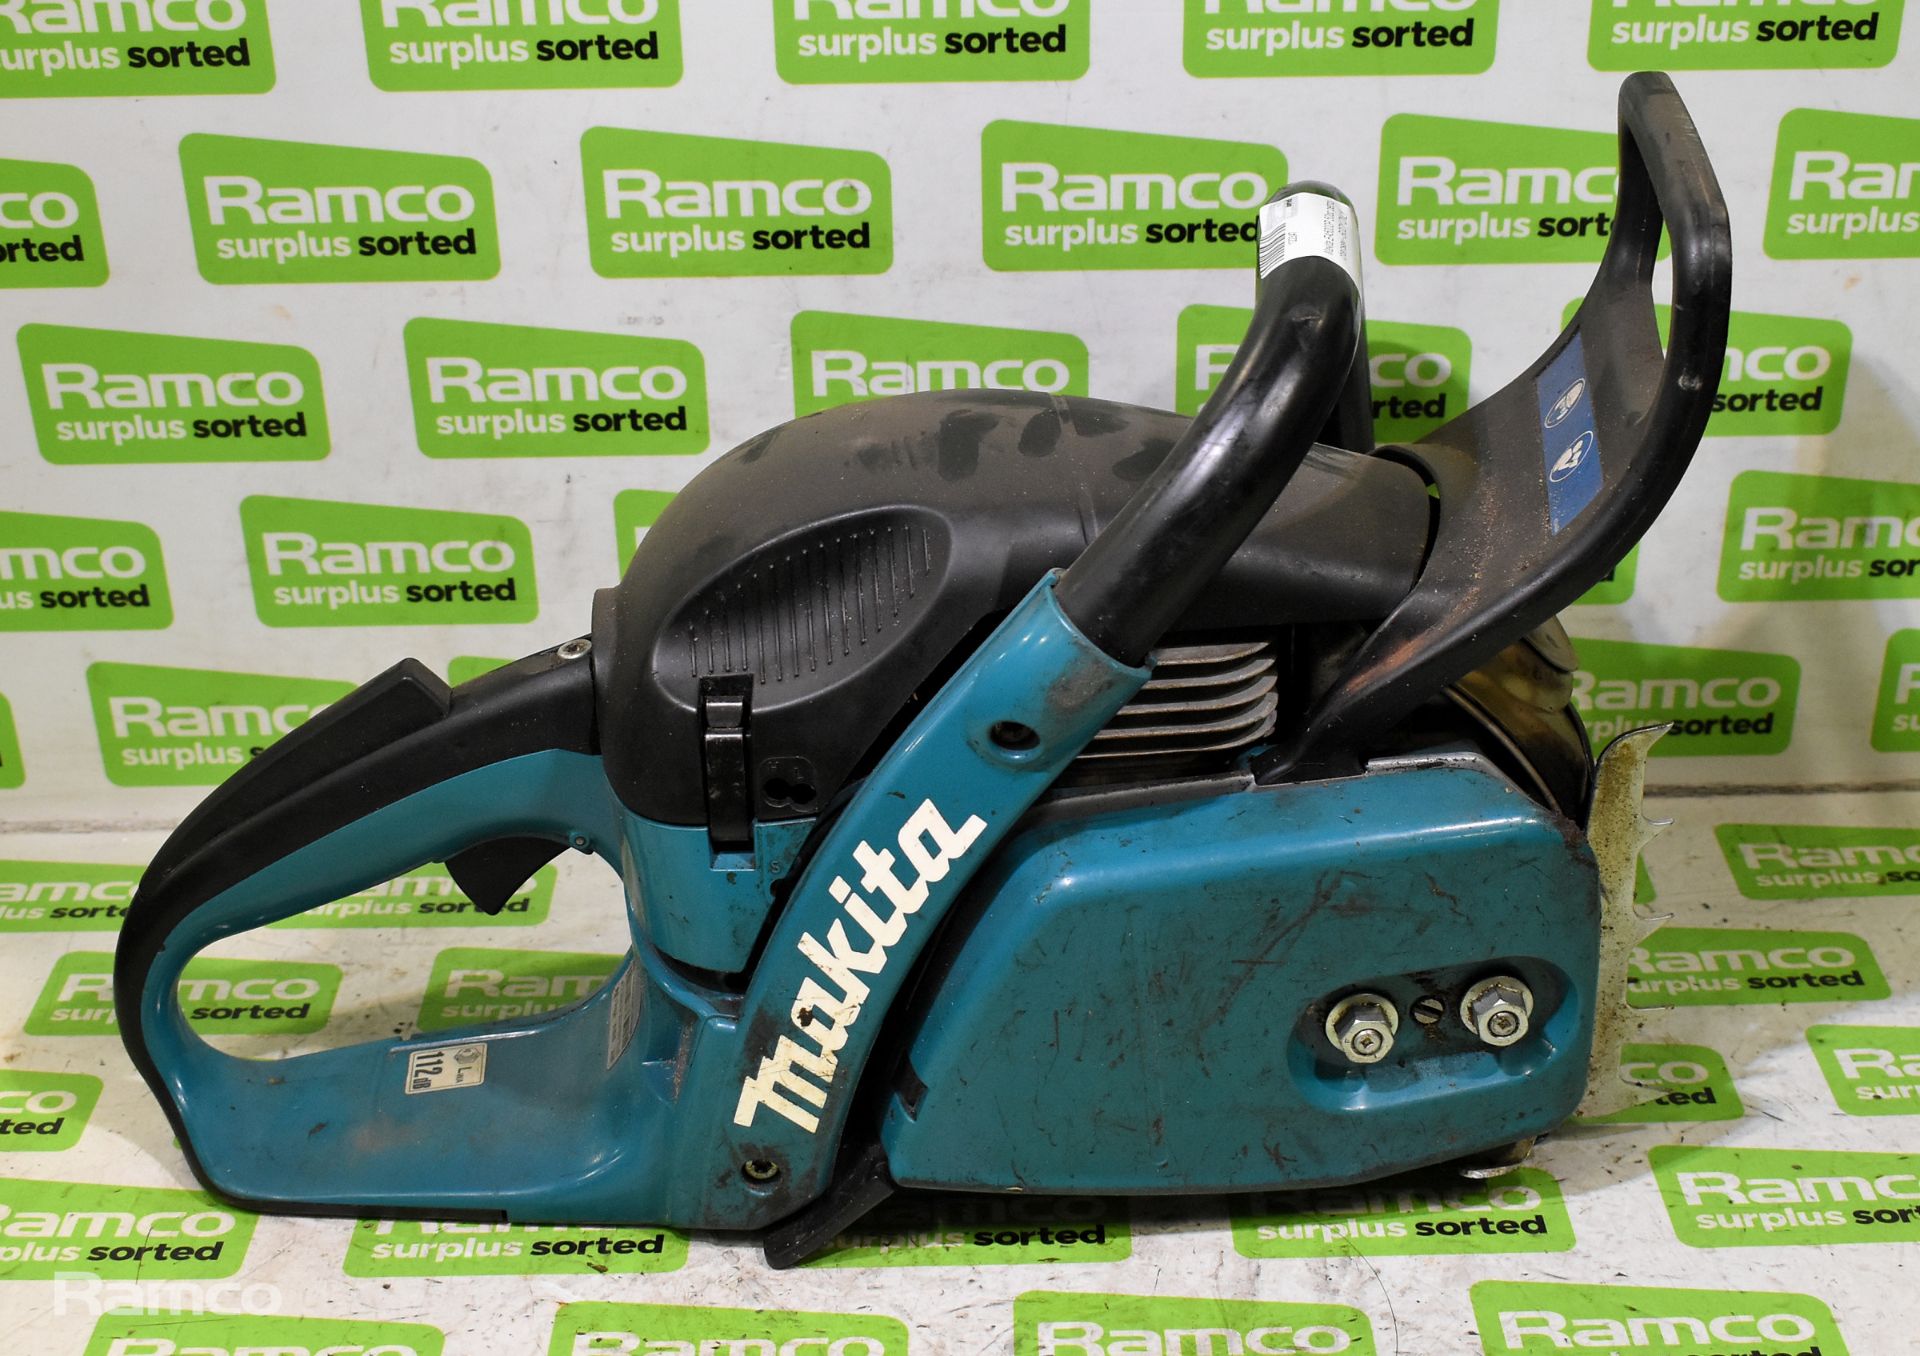 3x Makita DCS5030 50cc petrol chainsaw - BODIES ONLY - AS SPARES AND REPAIRS, 1x Makita EA5000P - Image 13 of 22